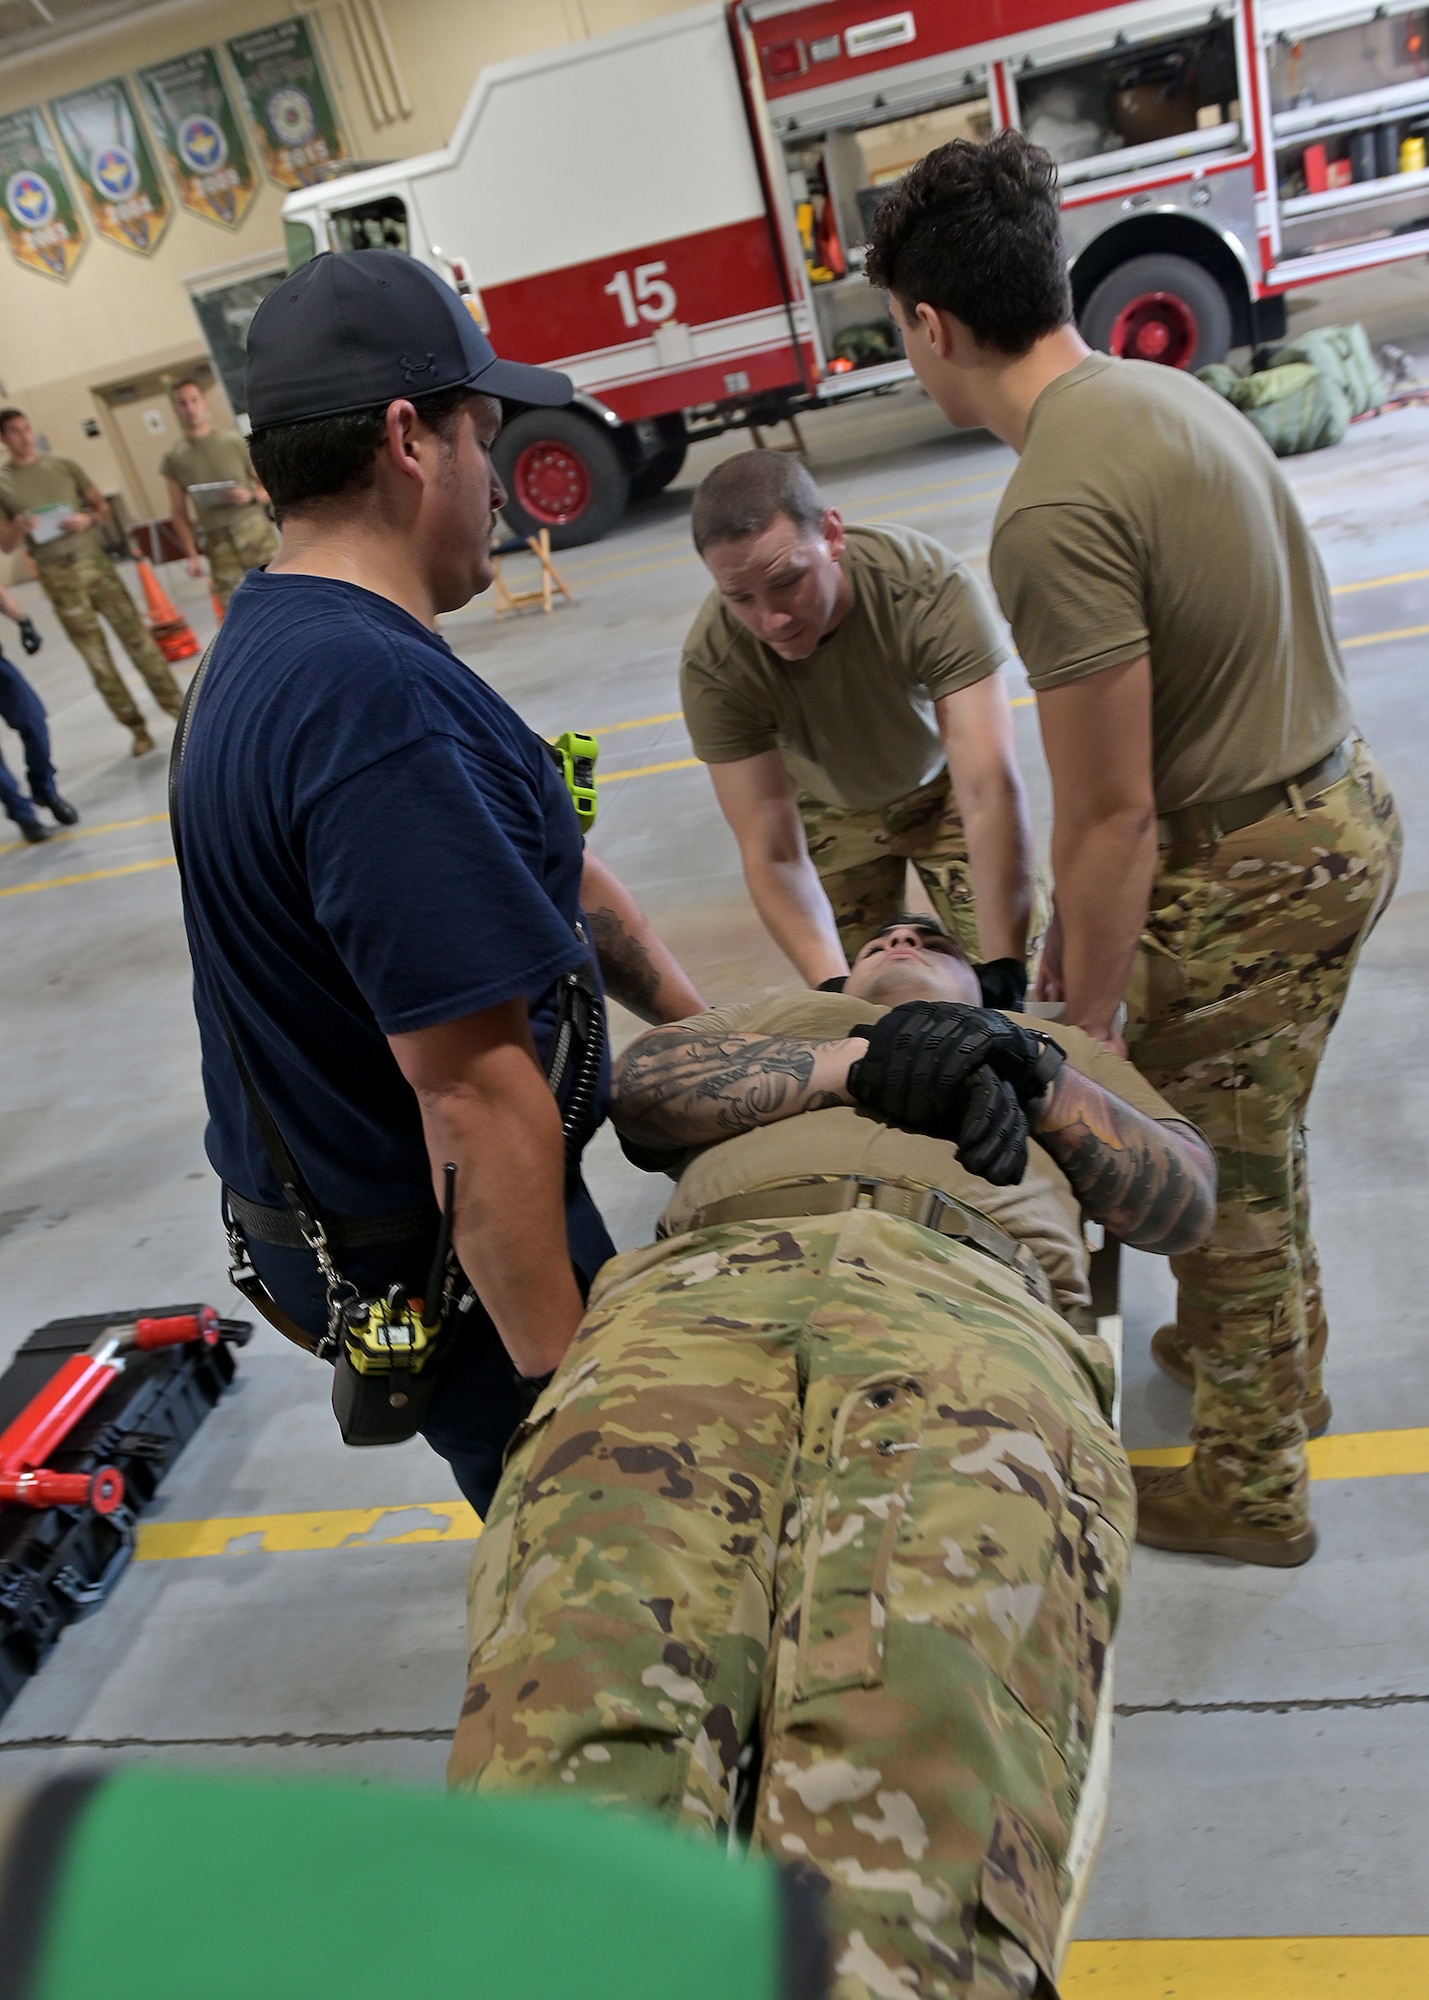 A simulated injured firefighter is carried away from a simulated hazardous materials spill.